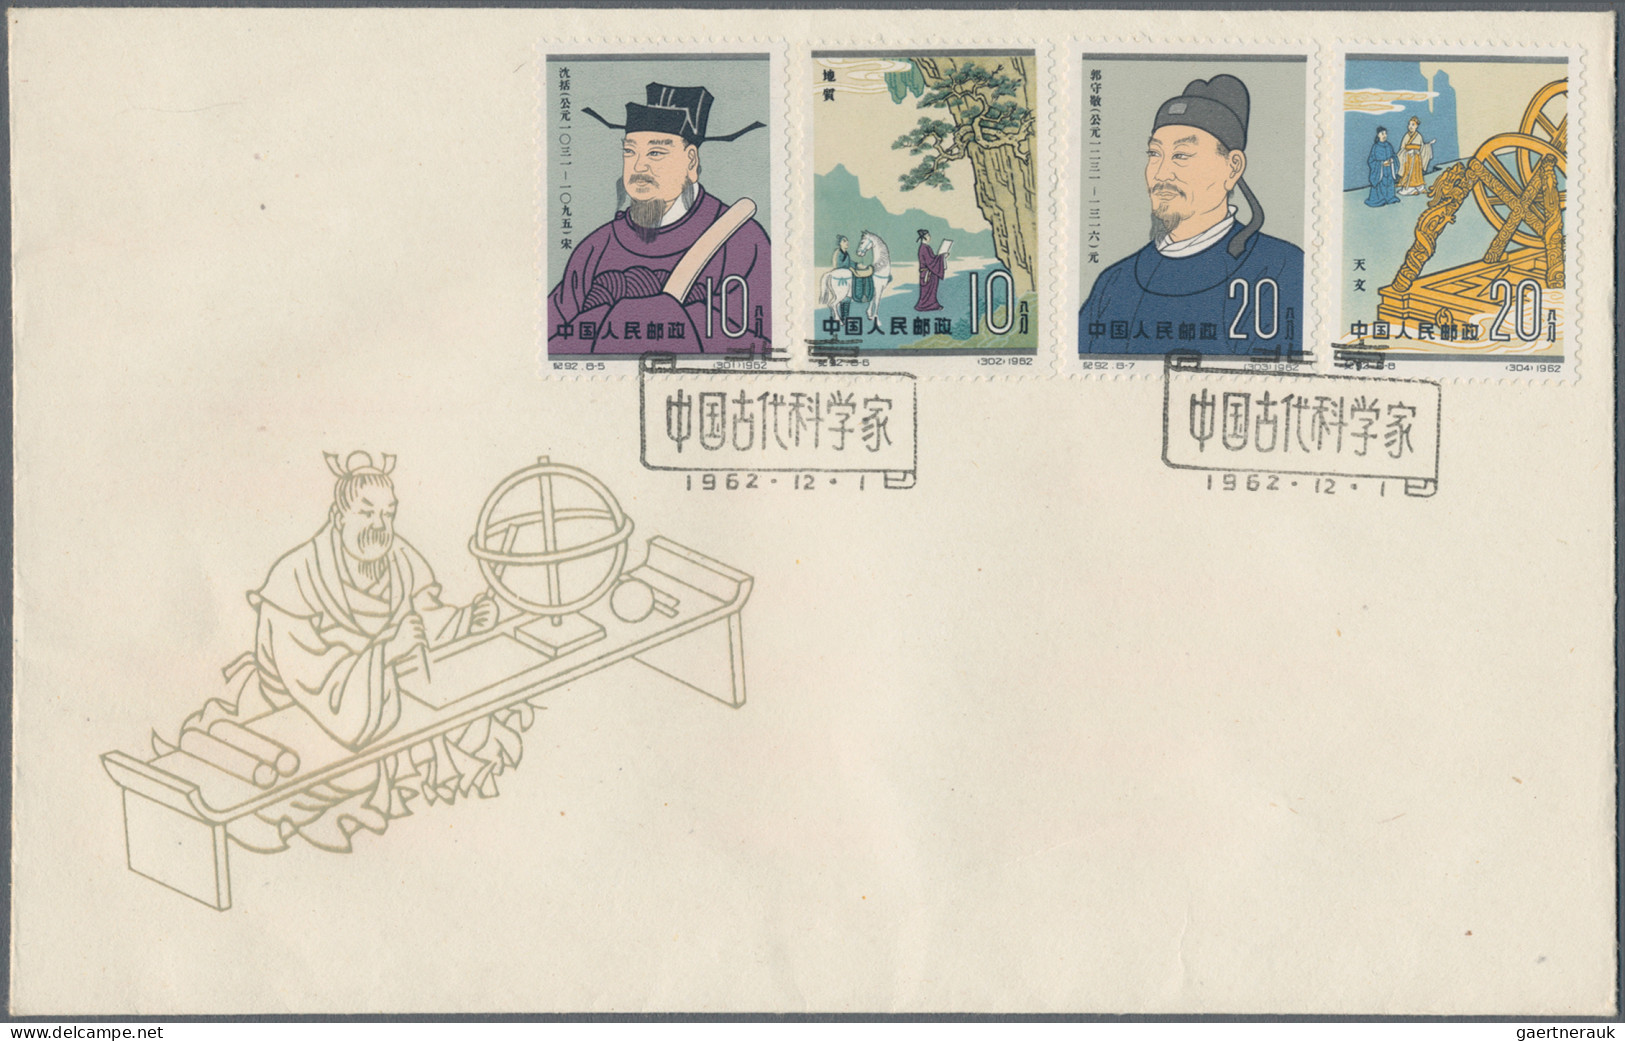 China (PRC): 1962, Scientists of Ancient China (C92), two complete sets of eight